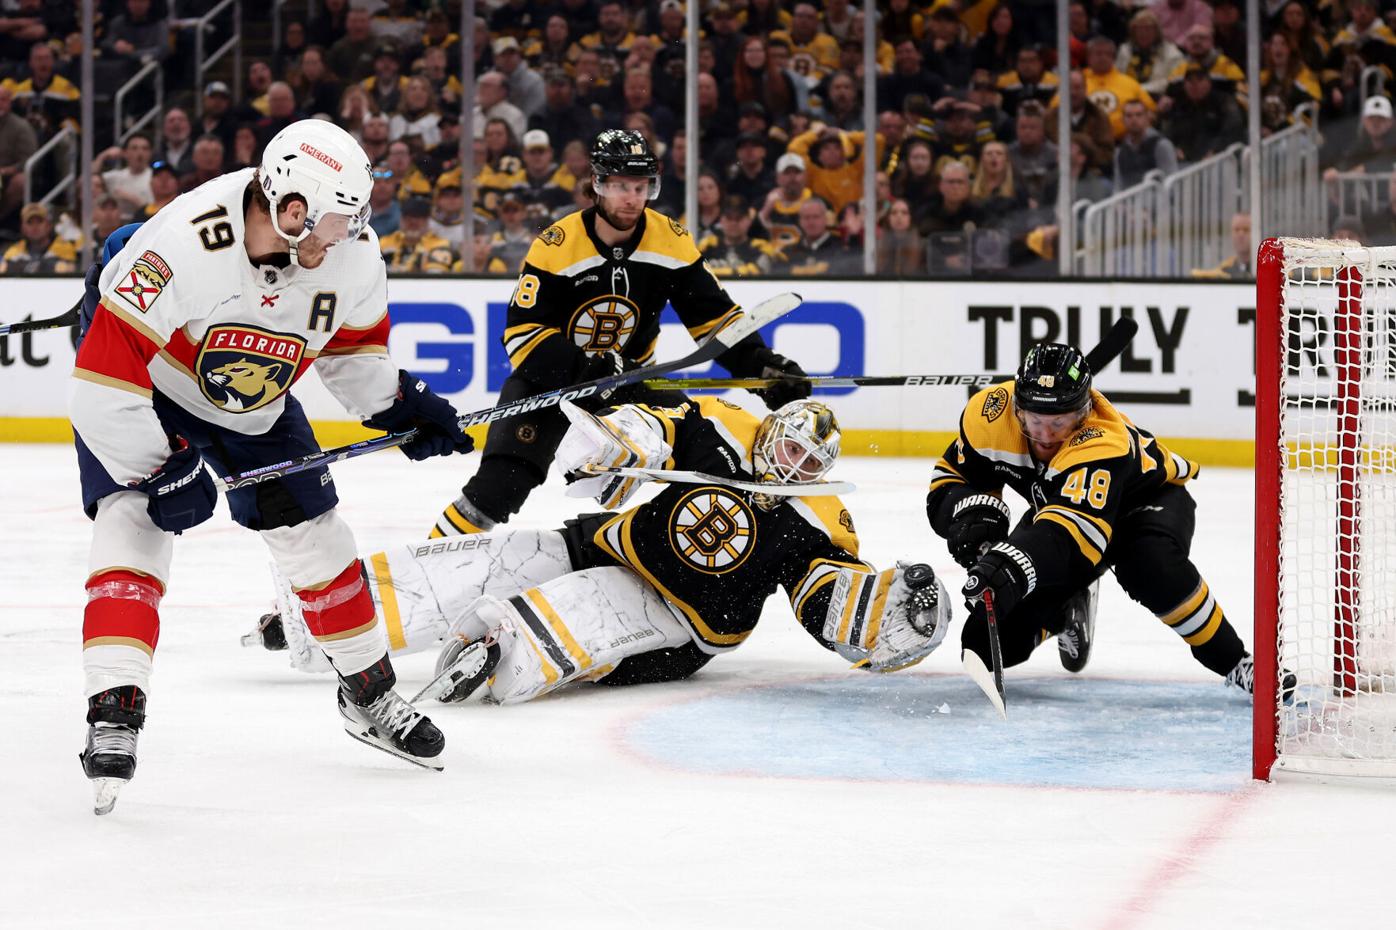 David Krejci ruled out for Game 4 against Panthers, Ullmark starts in net